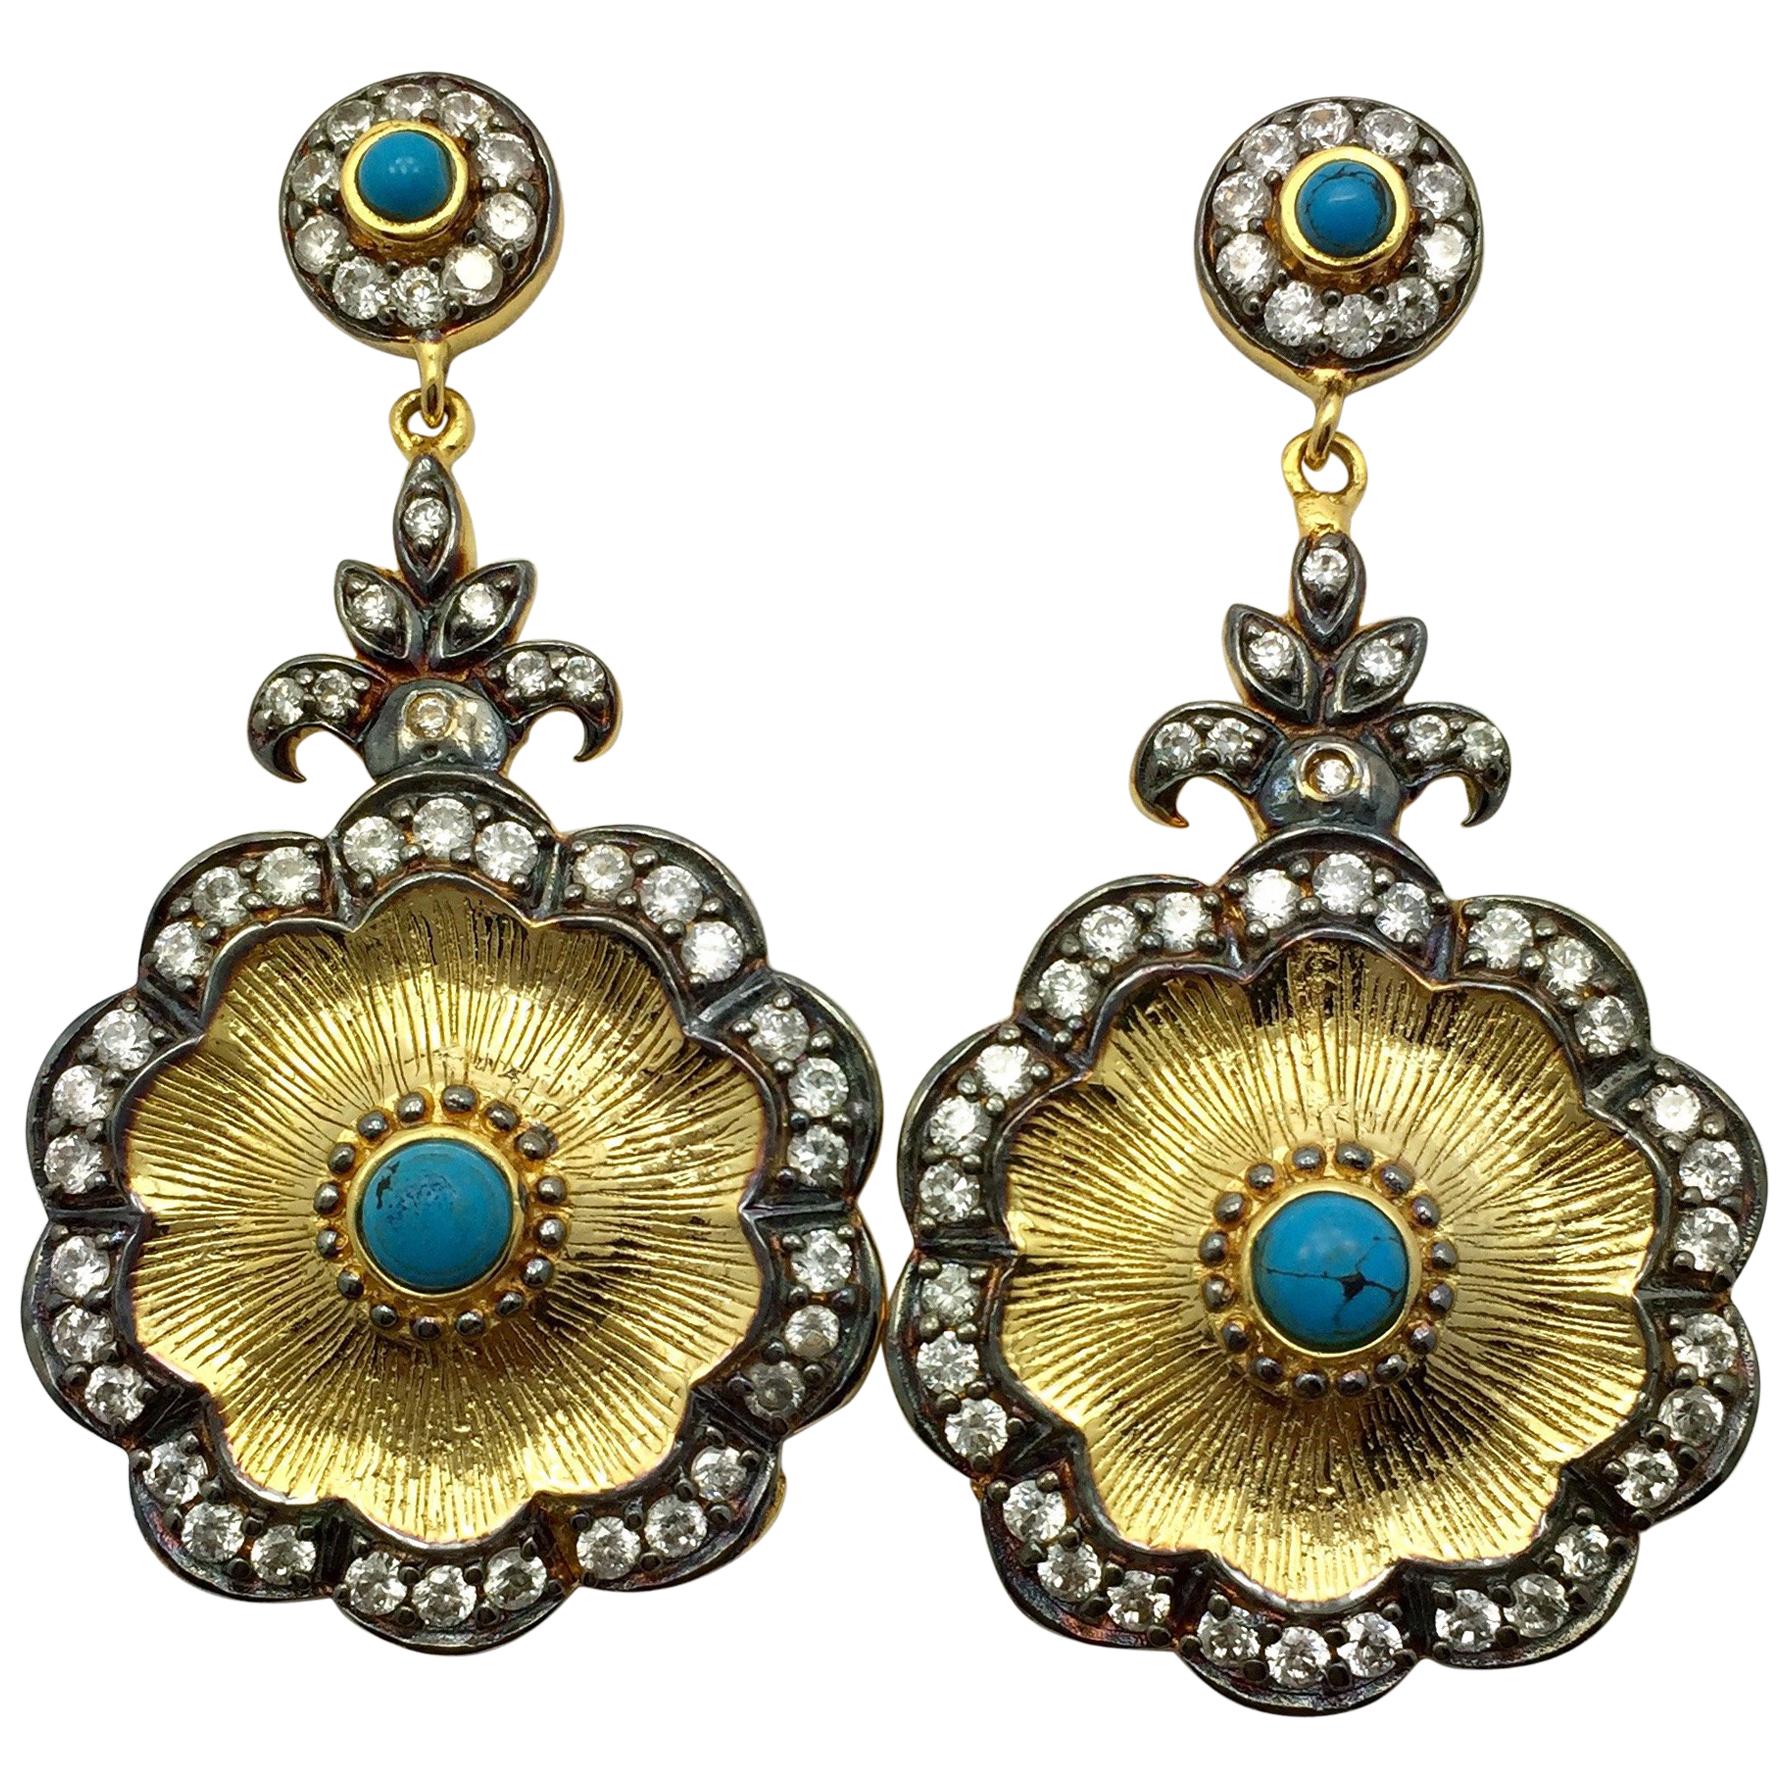 Meghna Jewels Hand brushed Camilla earrings in turquoise 